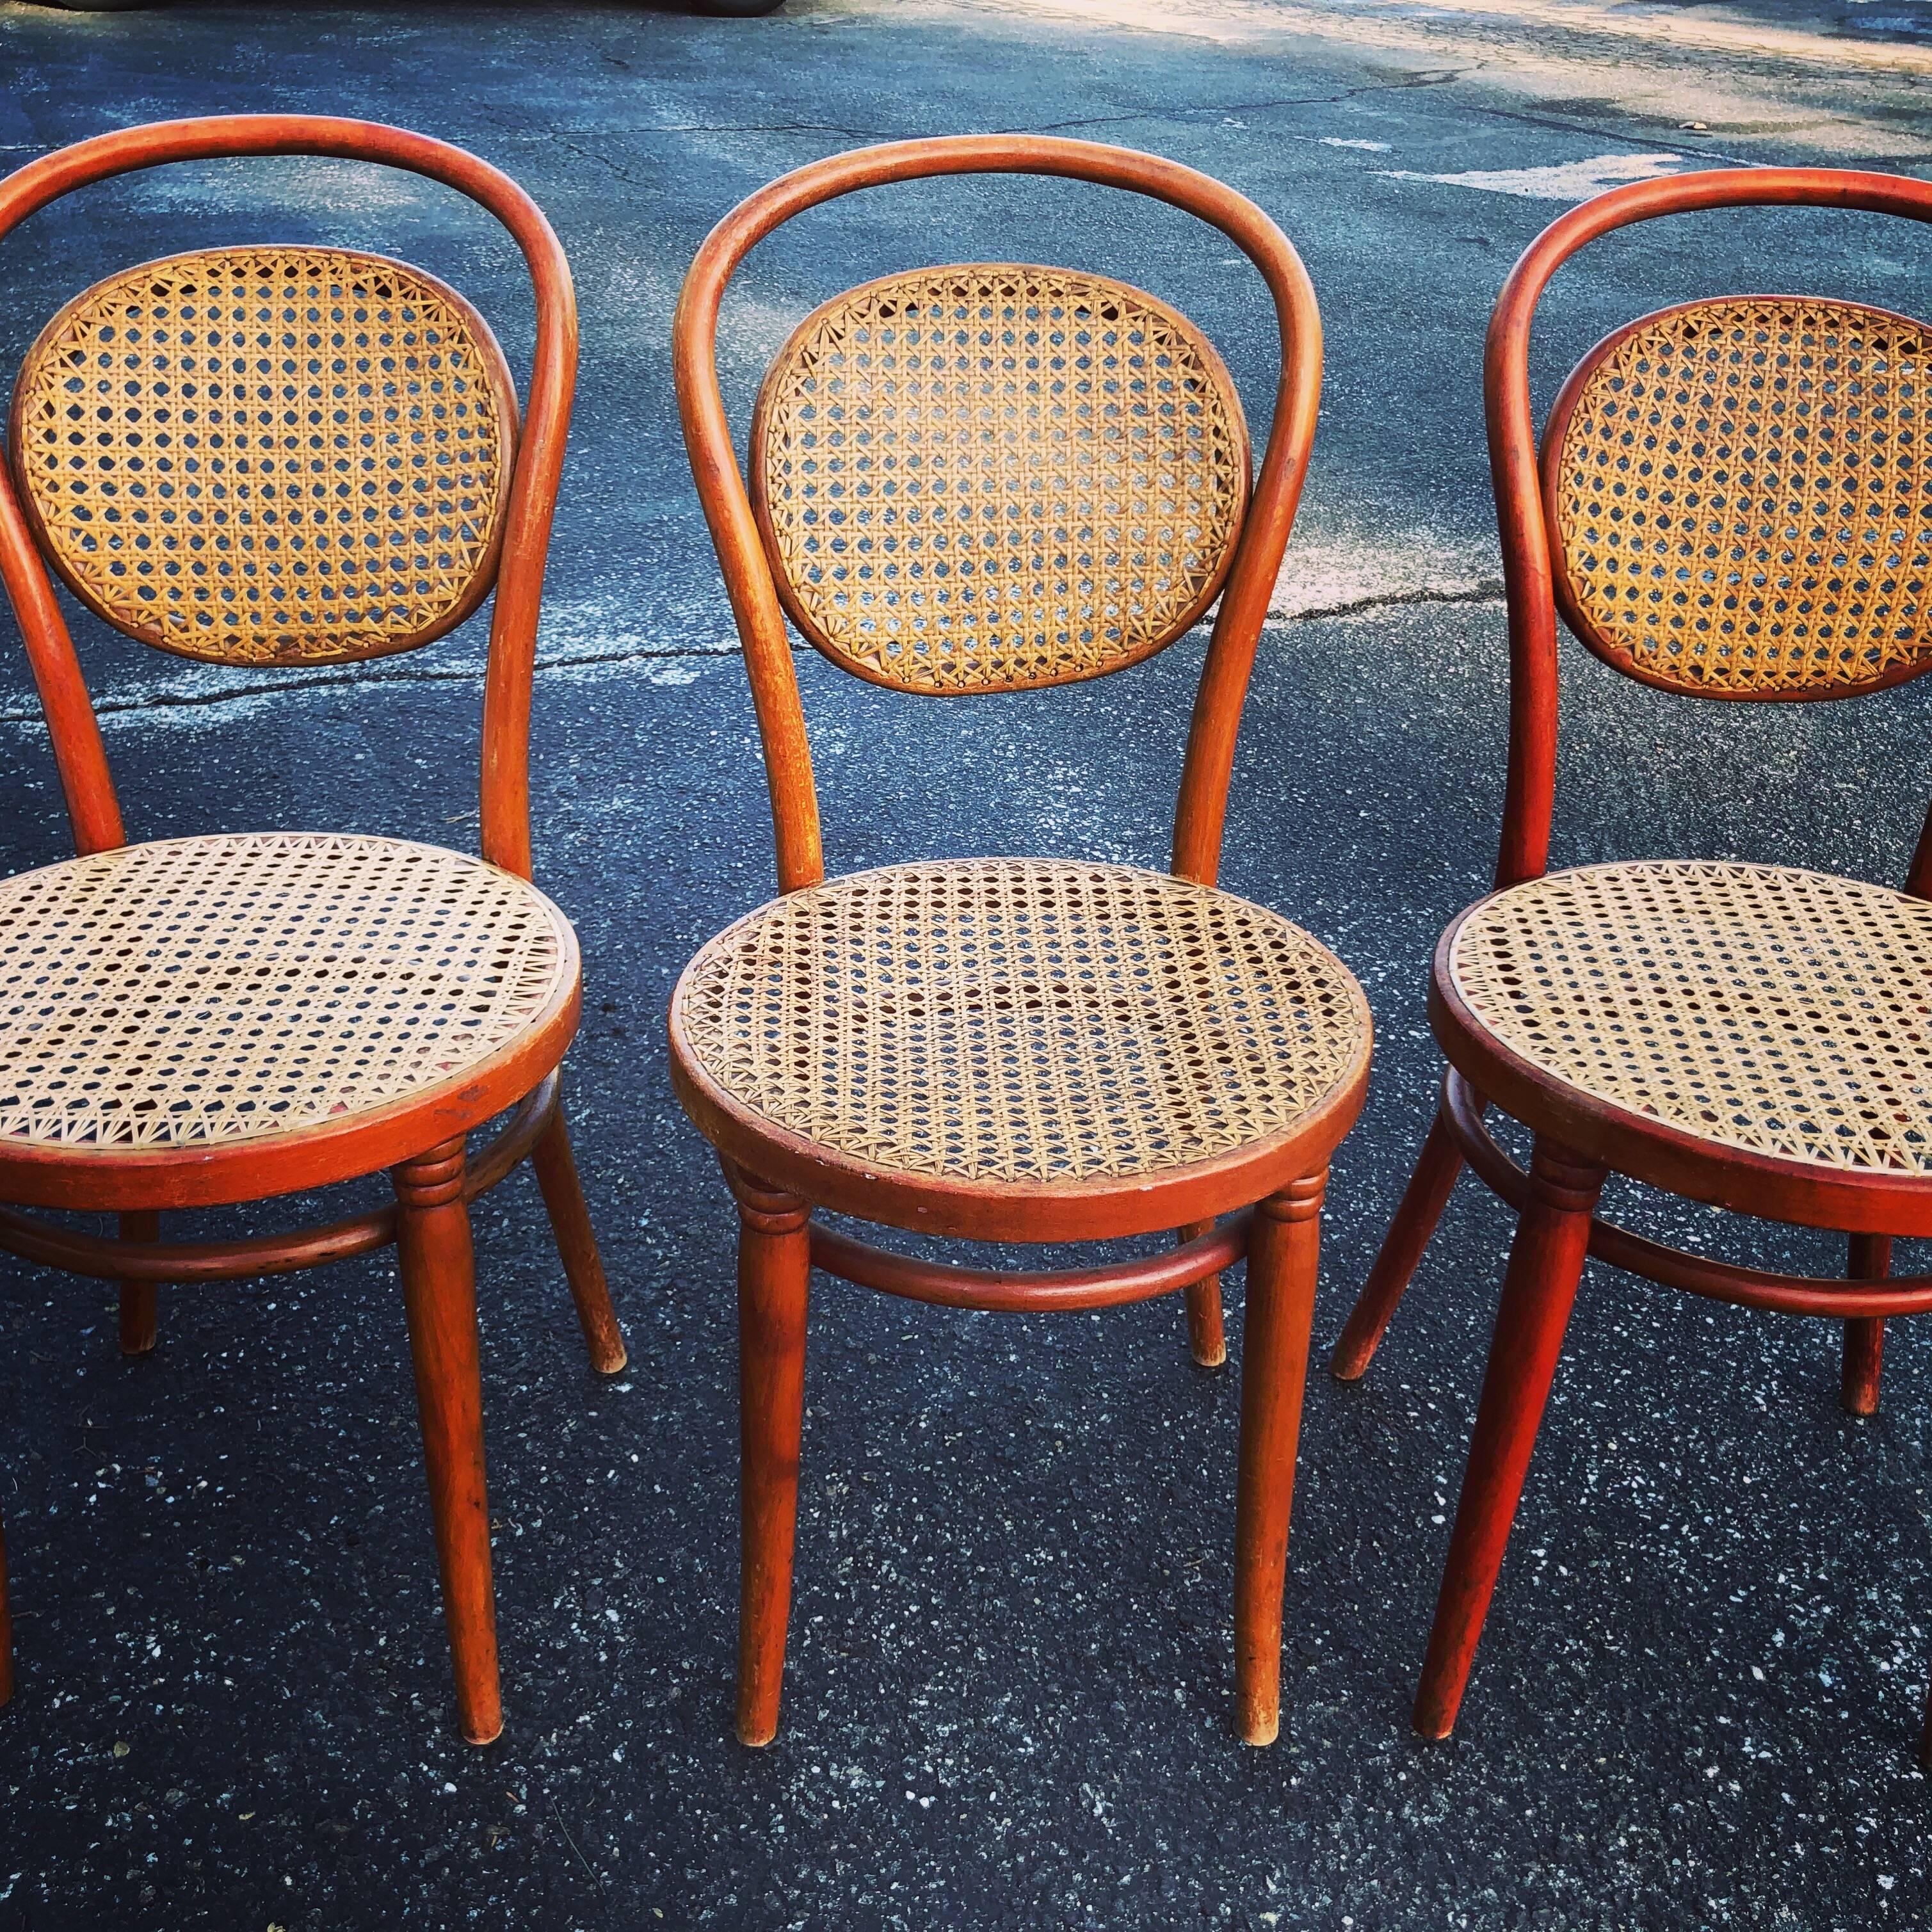 Set of three vintage bentwood Thonet style chairs. All have caning and are in perfect condition. One of three caned seats is darker than the other two. Unusual and possibly rare to see a caned upper back as well. Will break up and sell in sets or